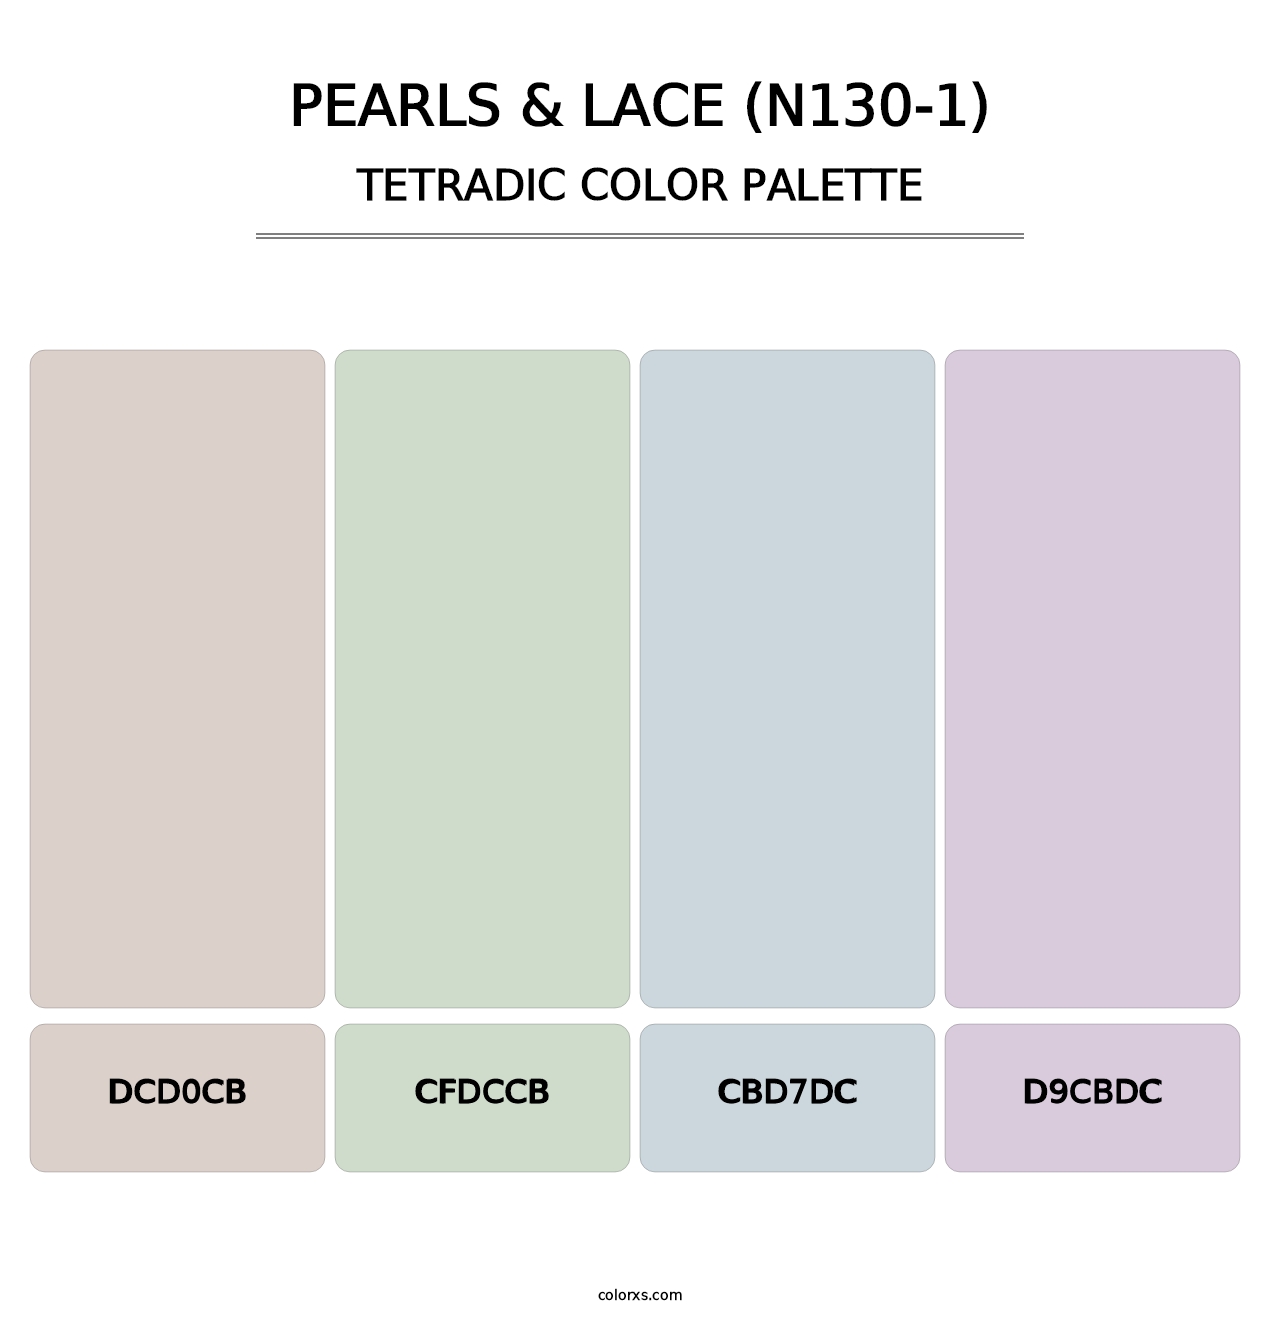 Pearls & Lace (N130-1) - Tetradic Color Palette